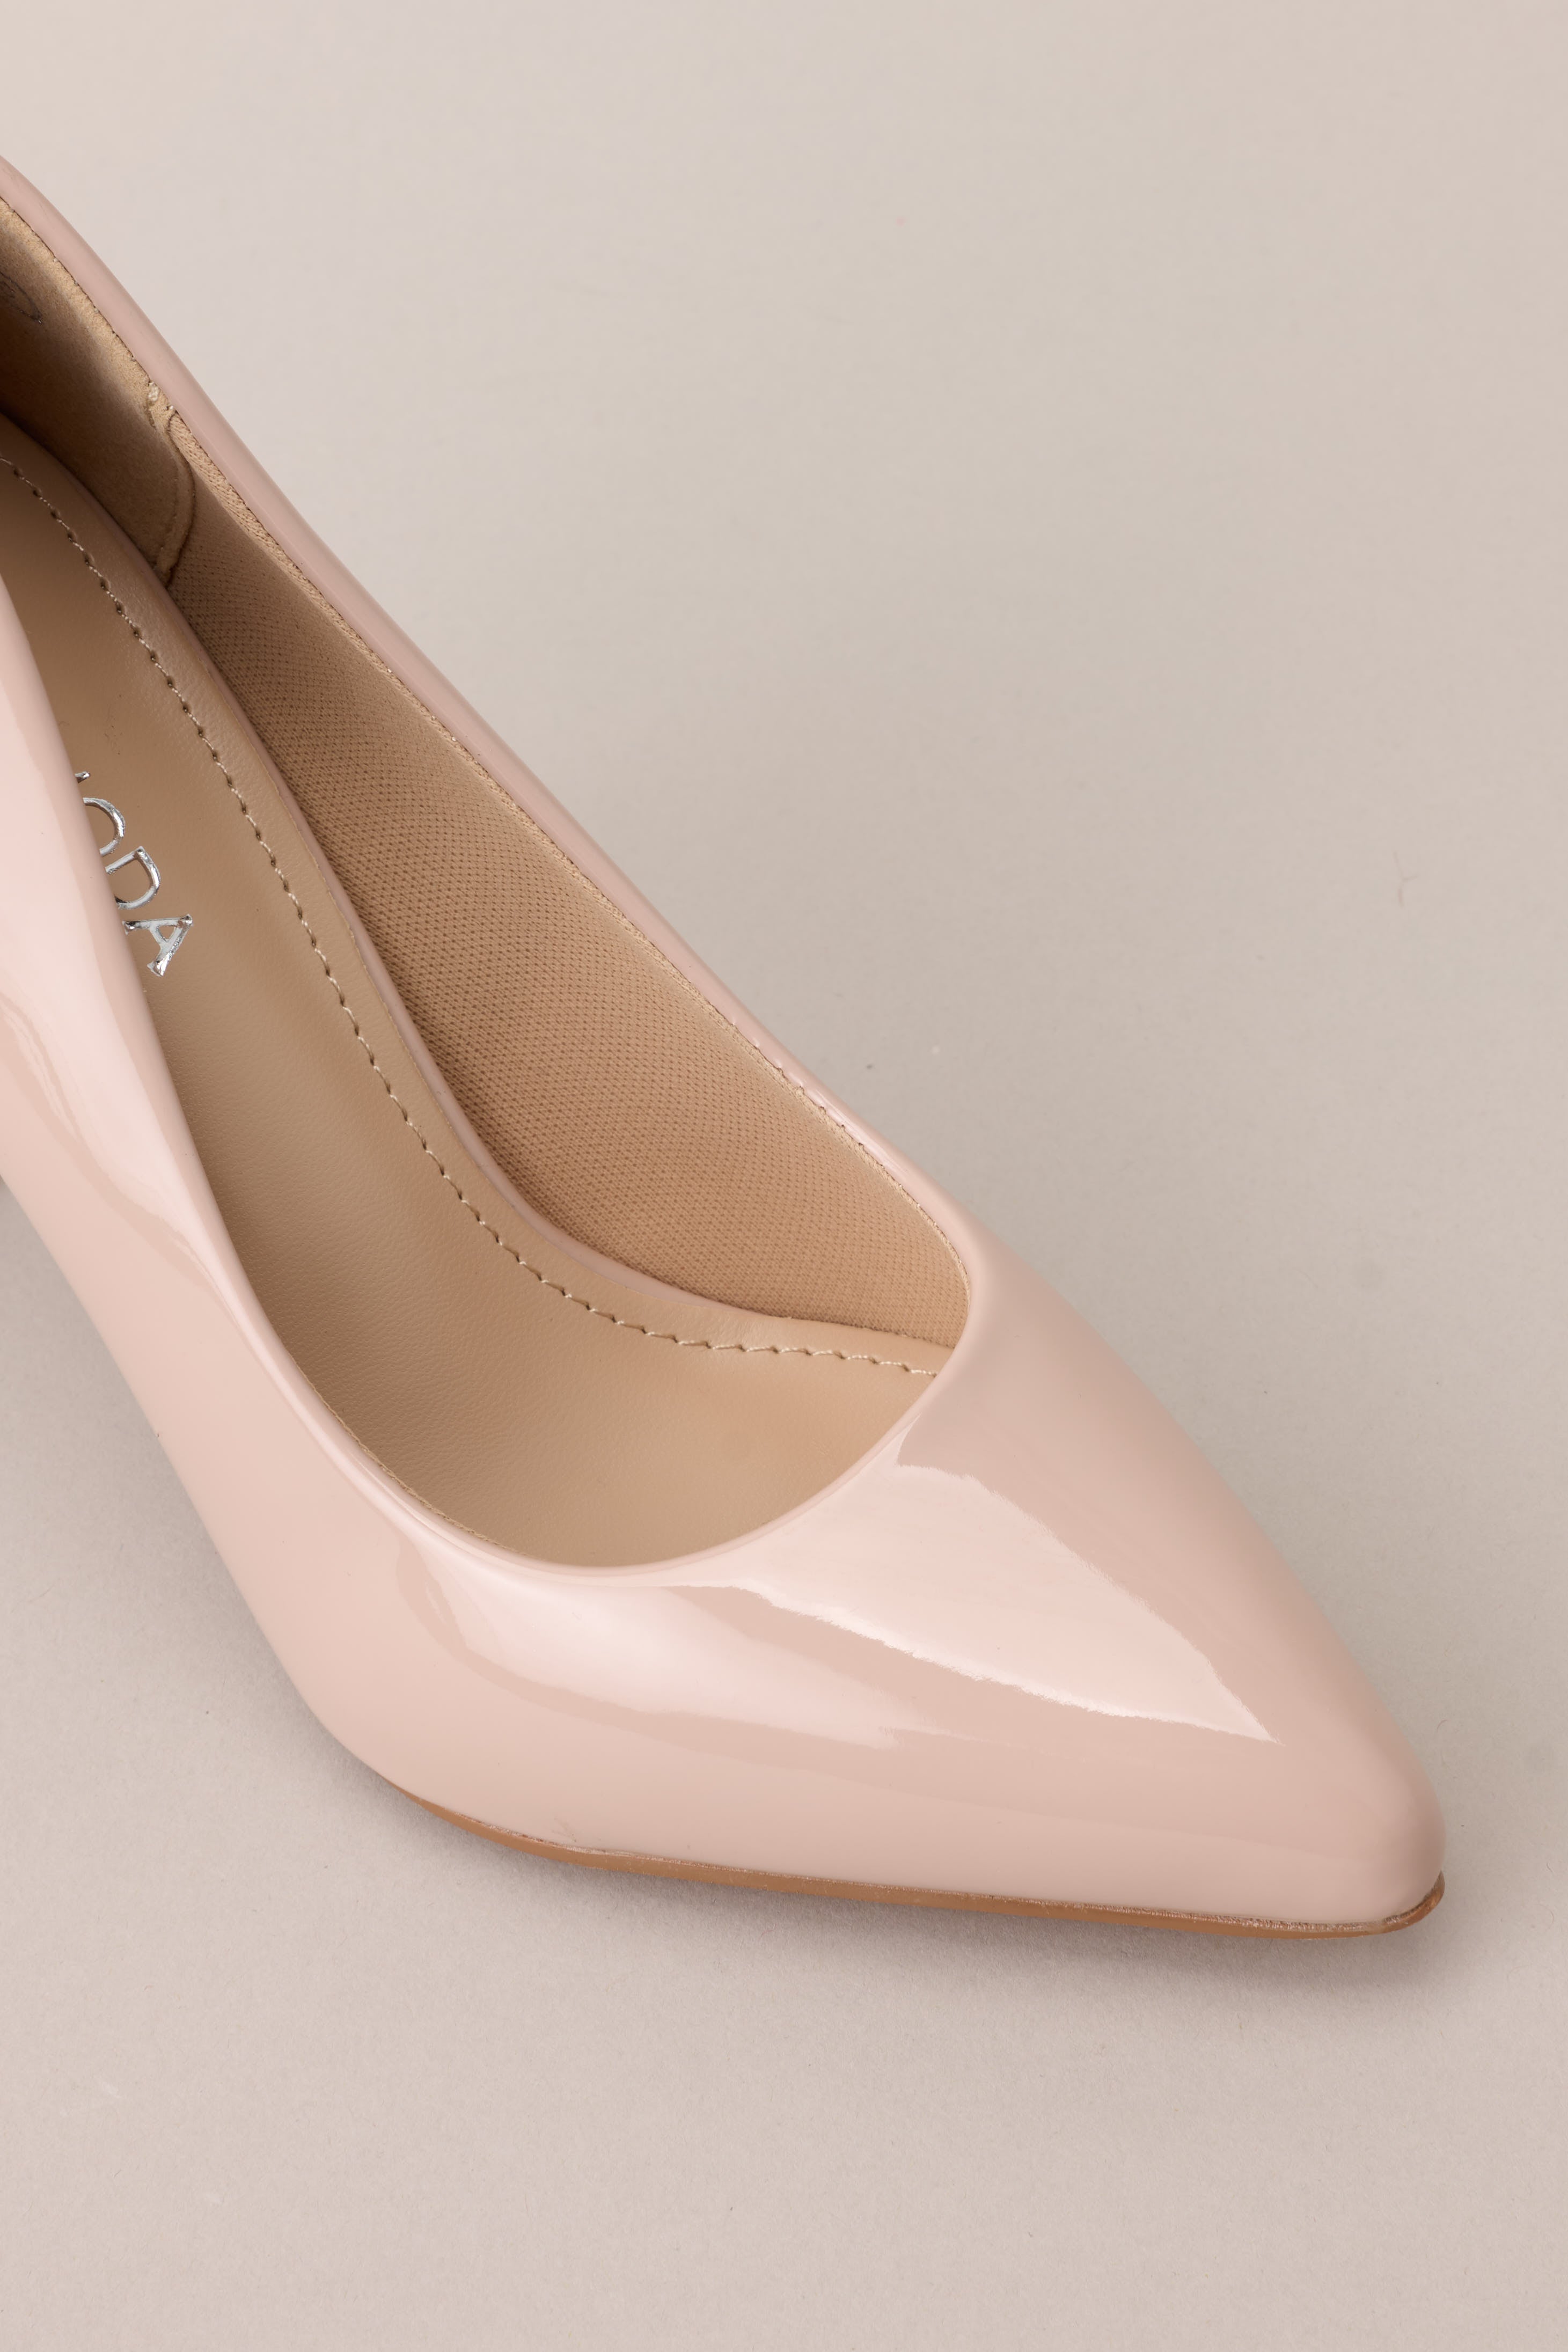 Close up view of the toe of these Beige heels with a pointed toe, vibrant color, glossy finish, and skinny heel.